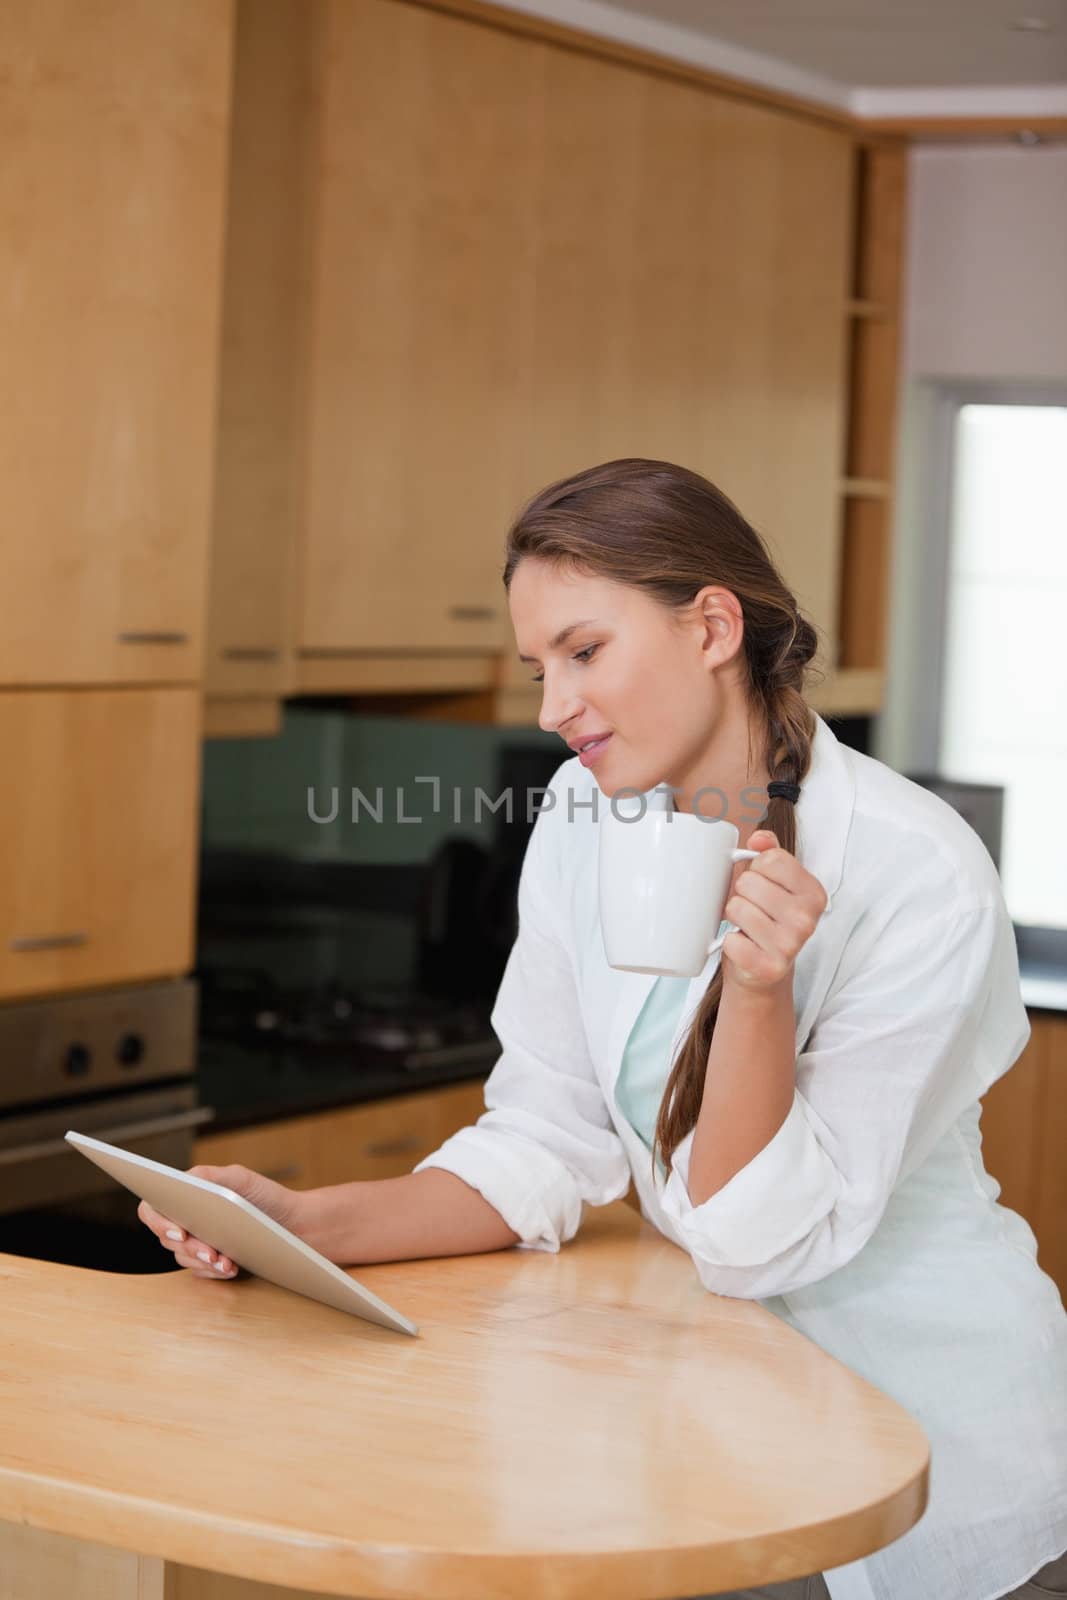 Woman holding a cup while looking at a tablet computer by Wavebreakmedia